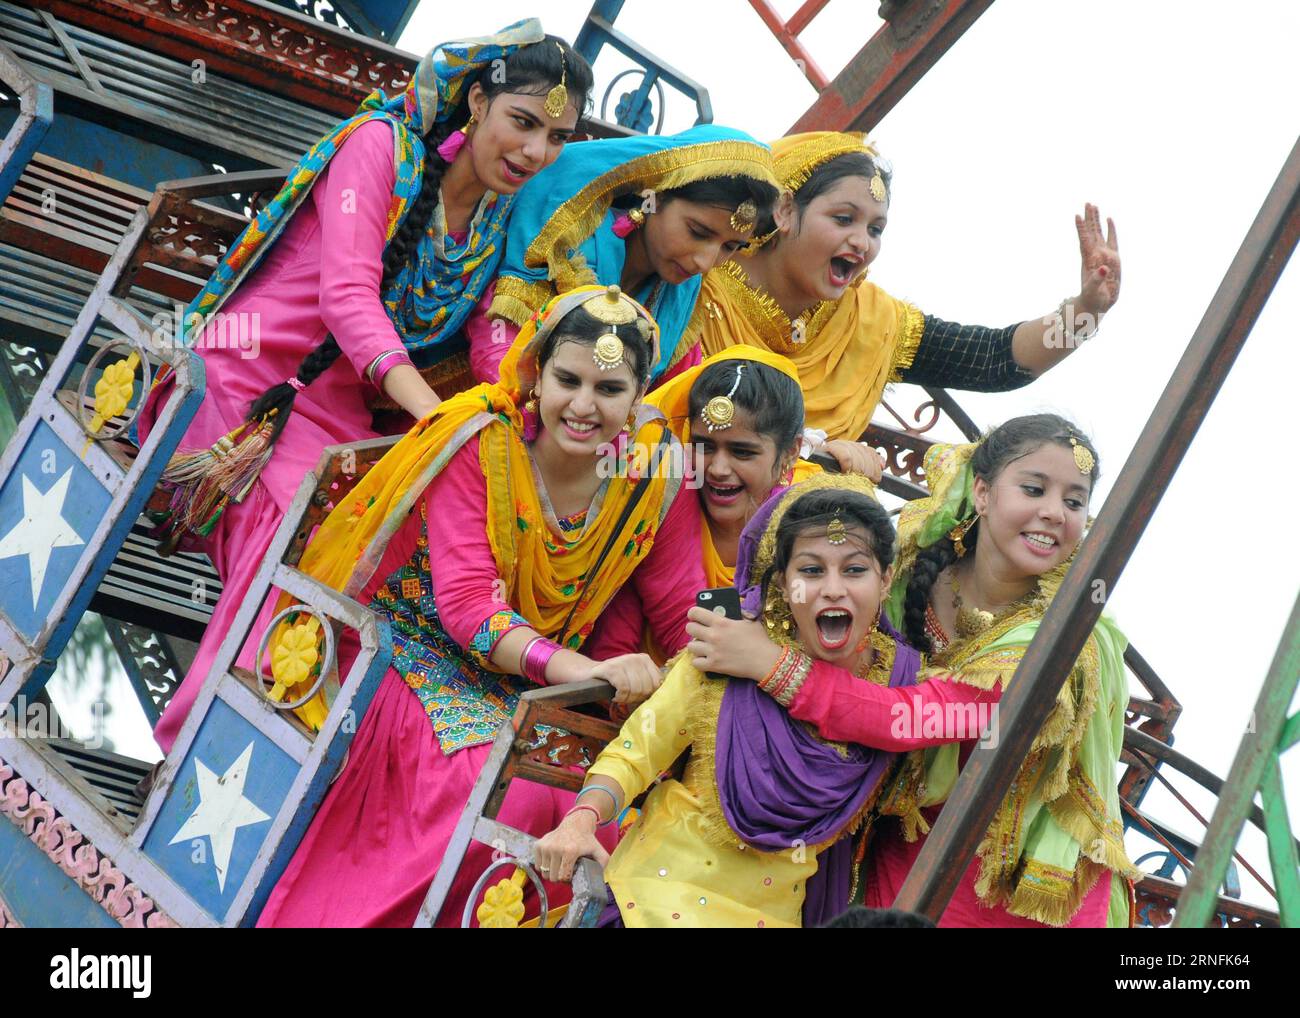 (160813) -- AMRITSAR (INDIA), Aug. 13, 2016 -- College girls wearing traditional Punjabi dresses ride viking ship during the celebration of Teej Festival in Amritsar, India, Aug. 13, 2016. Teej is a generic name for a number of festivals celebrated among females to welcome monsoon season in northern and western India and Nepal. ) (wtc) INDIA-AMRITSAR-TEEJ FESTIVAL-CELEBRATION stringer PUBLICATIONxNOTxINxCHN   160813 Amritsar India Aug 13 2016 College Girls Wearing Traditional Punjabi Dresses Ride Viking Ship during The Celebration of Teej Festival in Amritsar India Aug 13 2016 Teej IS a generi Stock Photo